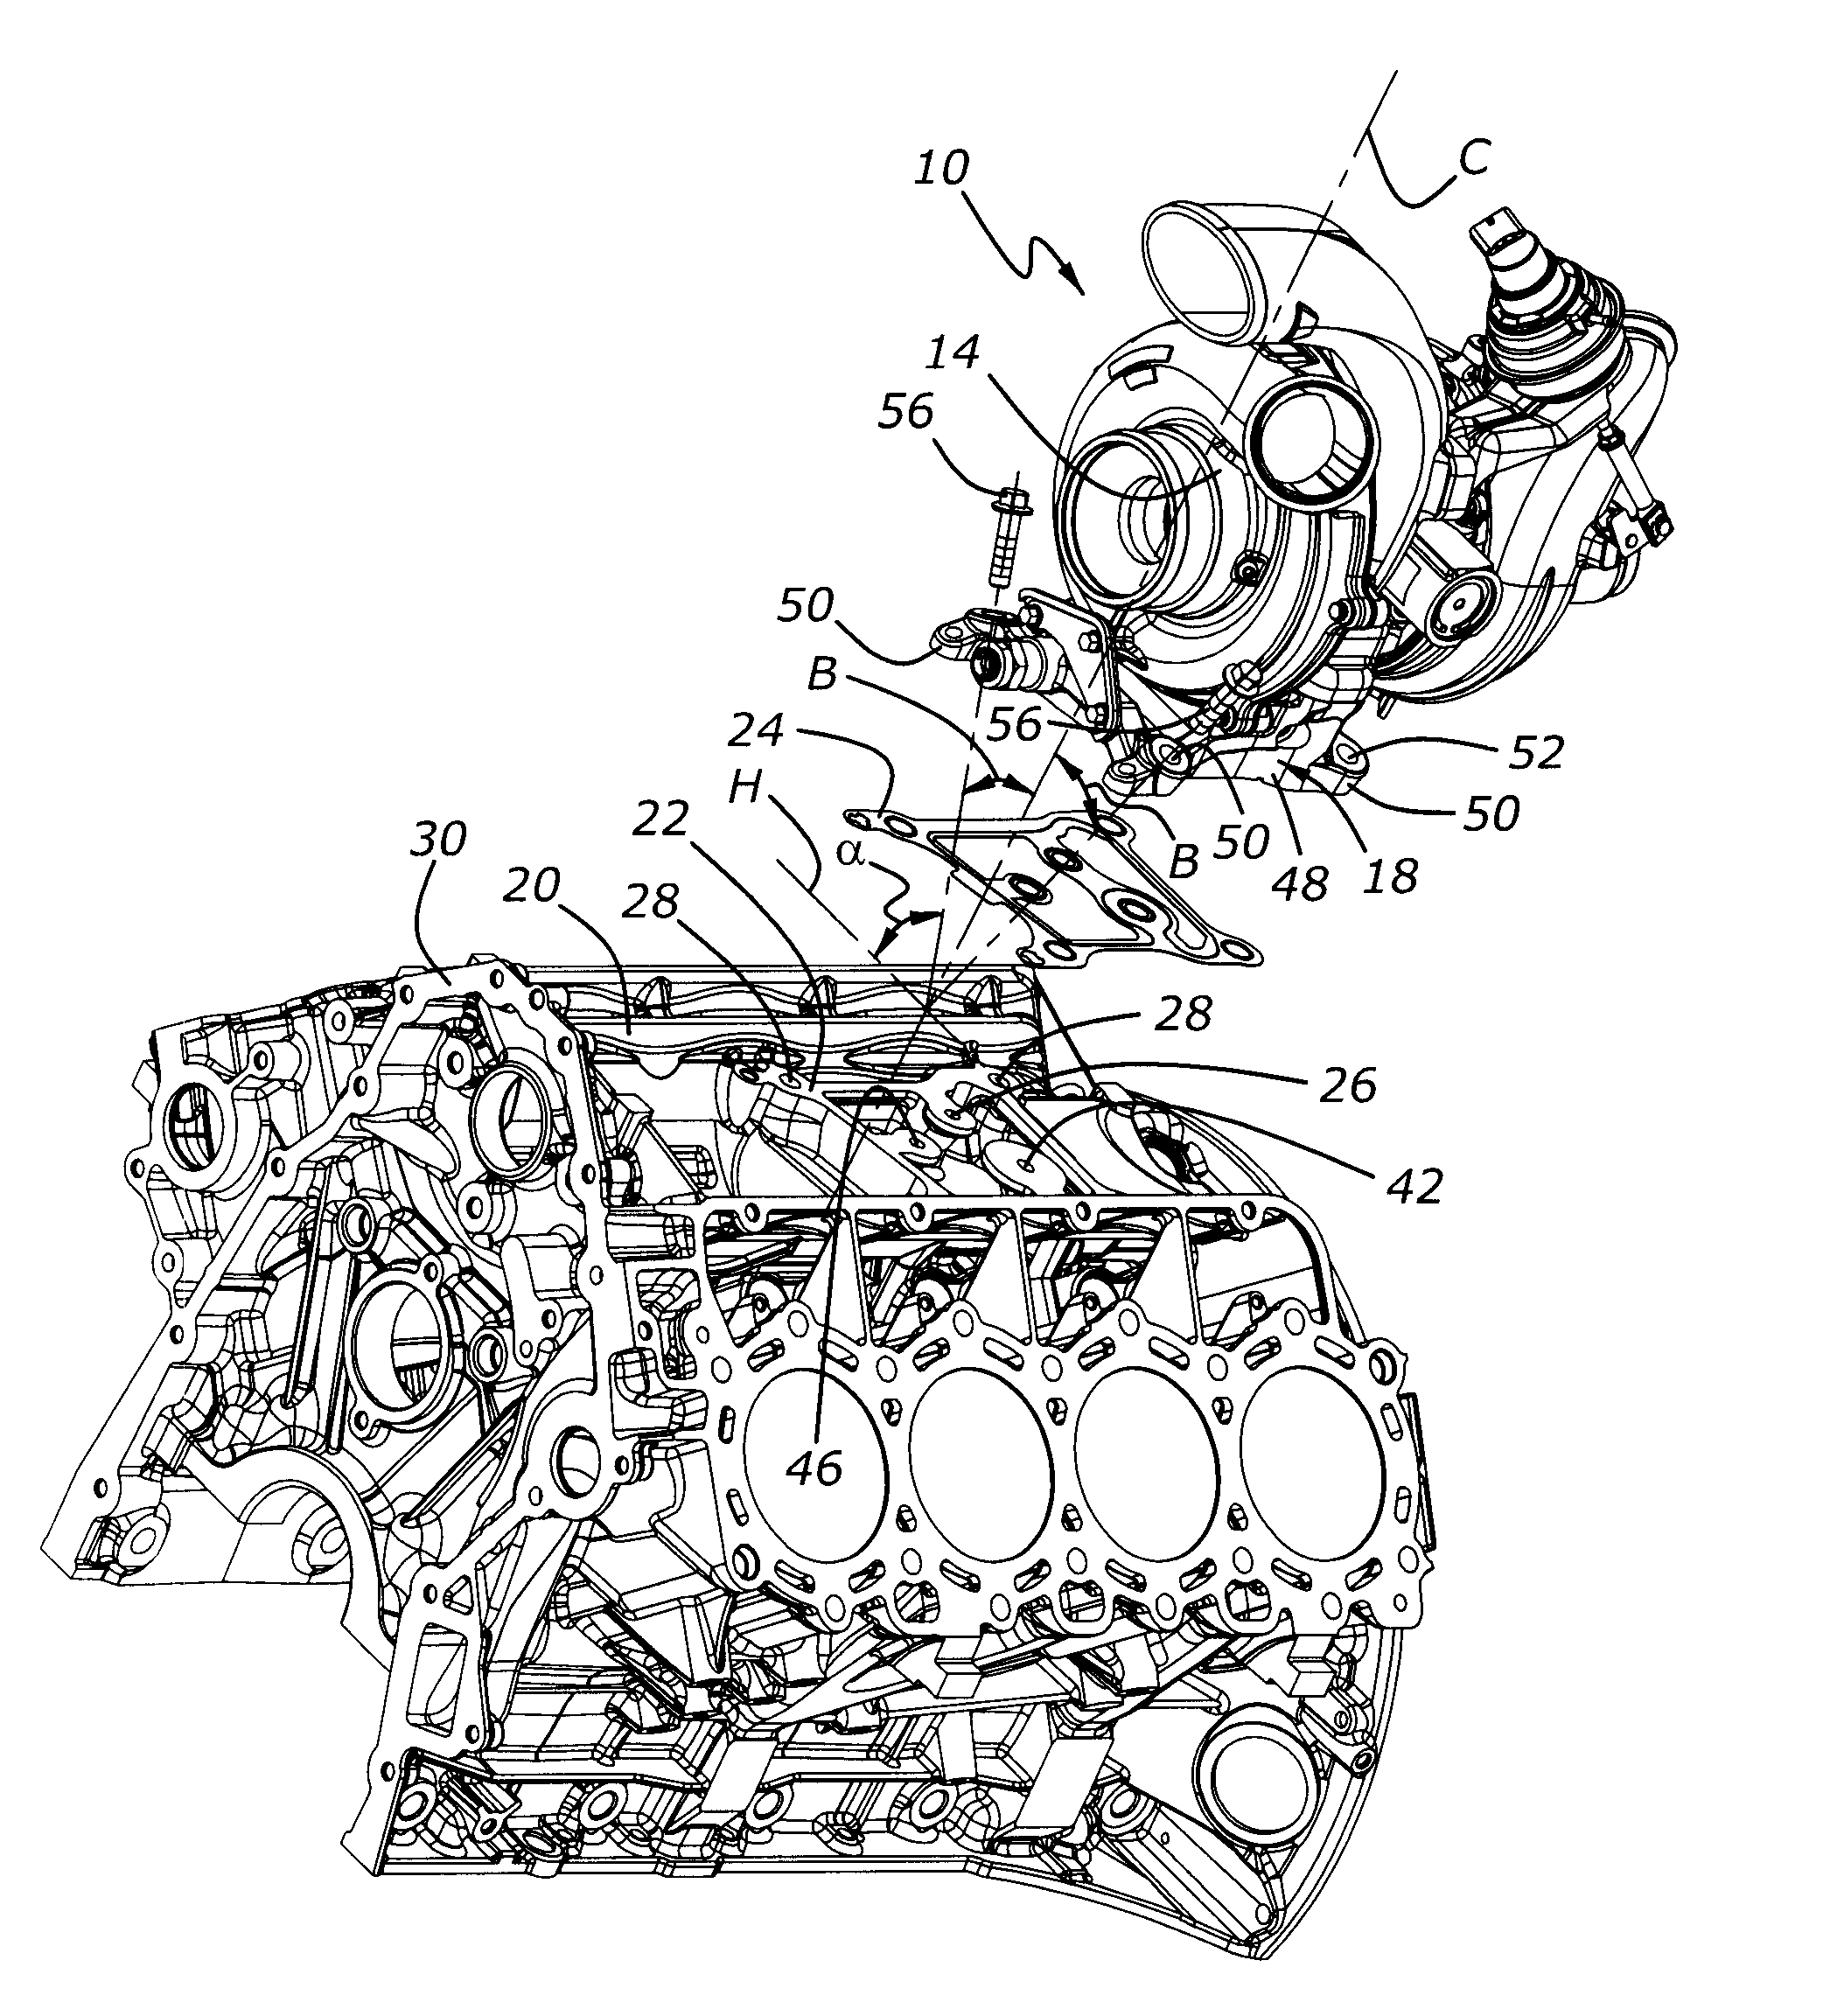 Turbocharger system for internal combustion engine with internal isolated turbocharger oil drainback passage